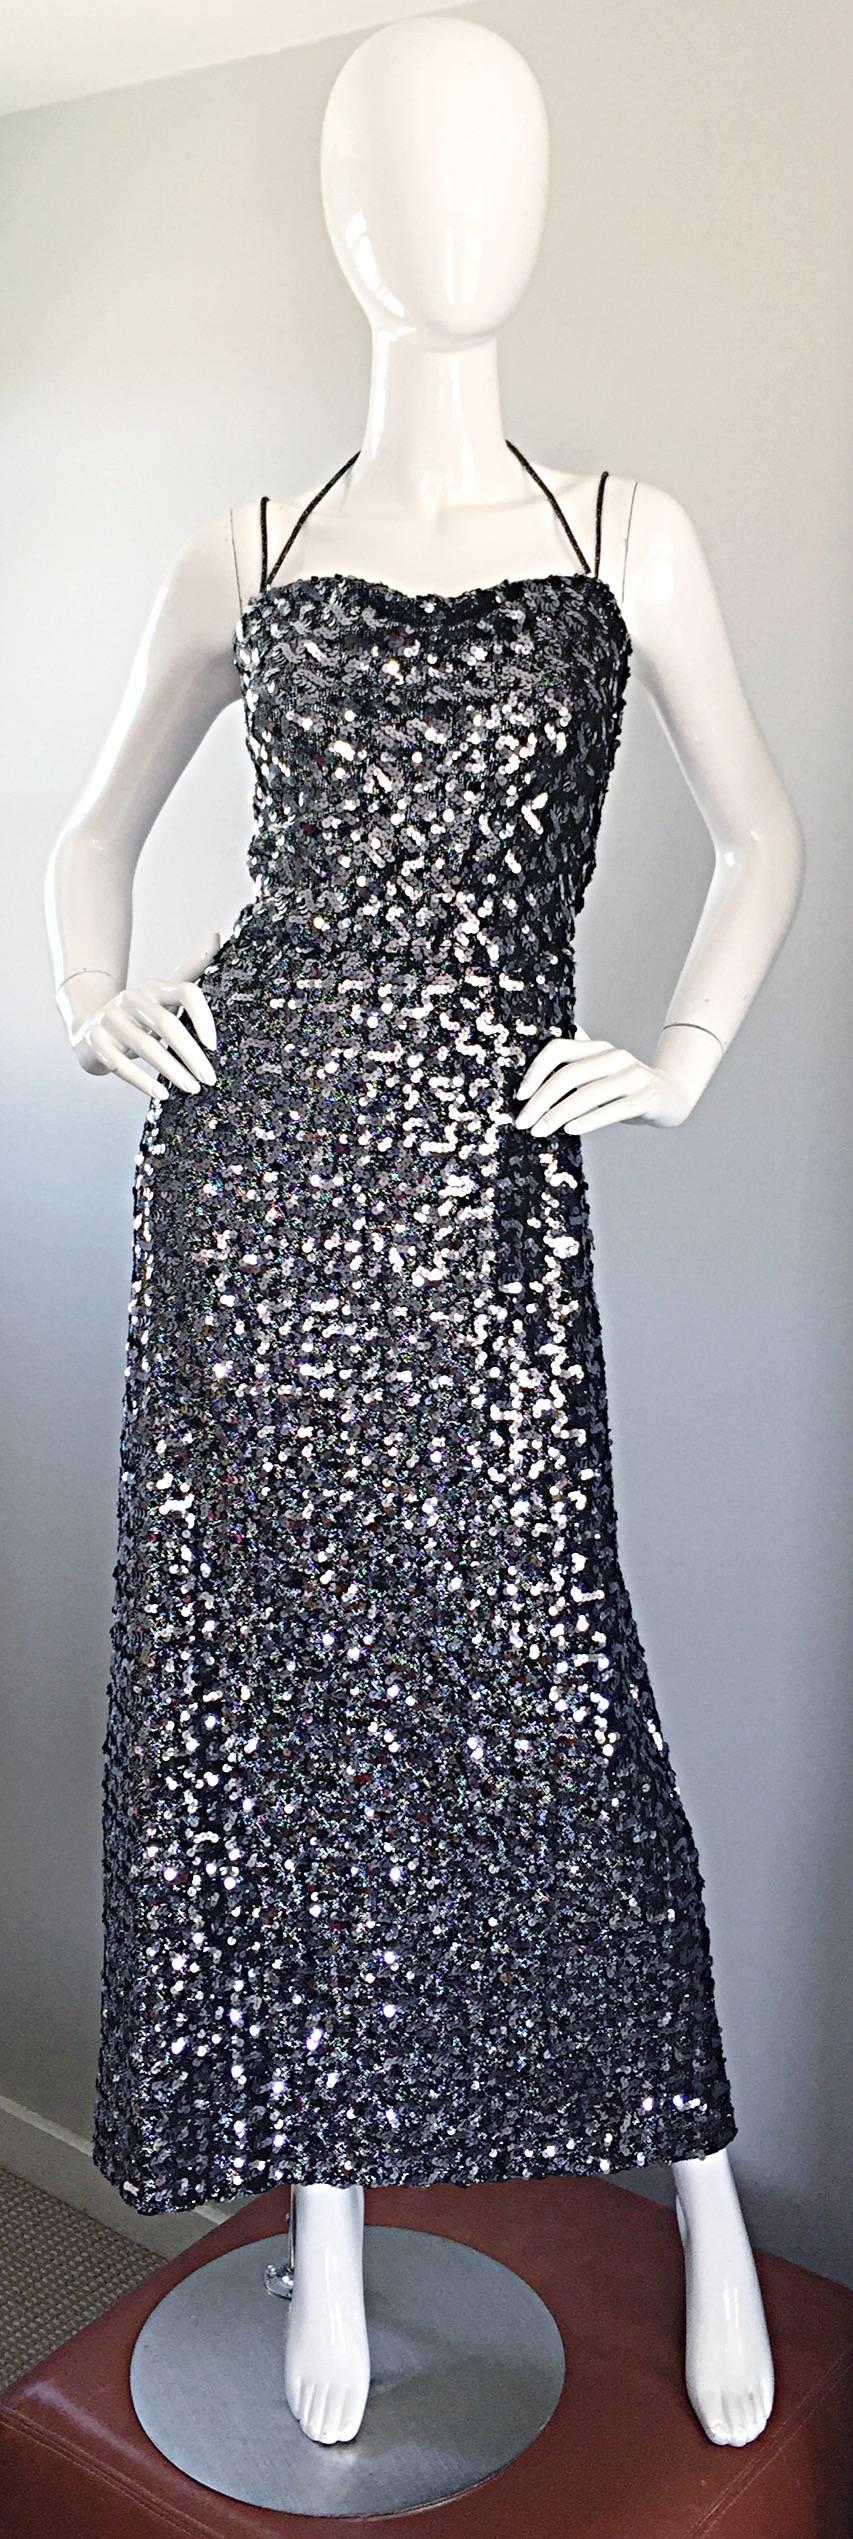 Incredible 70s NORMAN BERG for BUCKNER'S Silver knit halter maxi dress! Thousands of hand-sewn sequins, with a flattering draped bodice. Two thin straps at each arm with a tie halter neck. Hidden zipper up the back with hook-and-eye closure. Looks